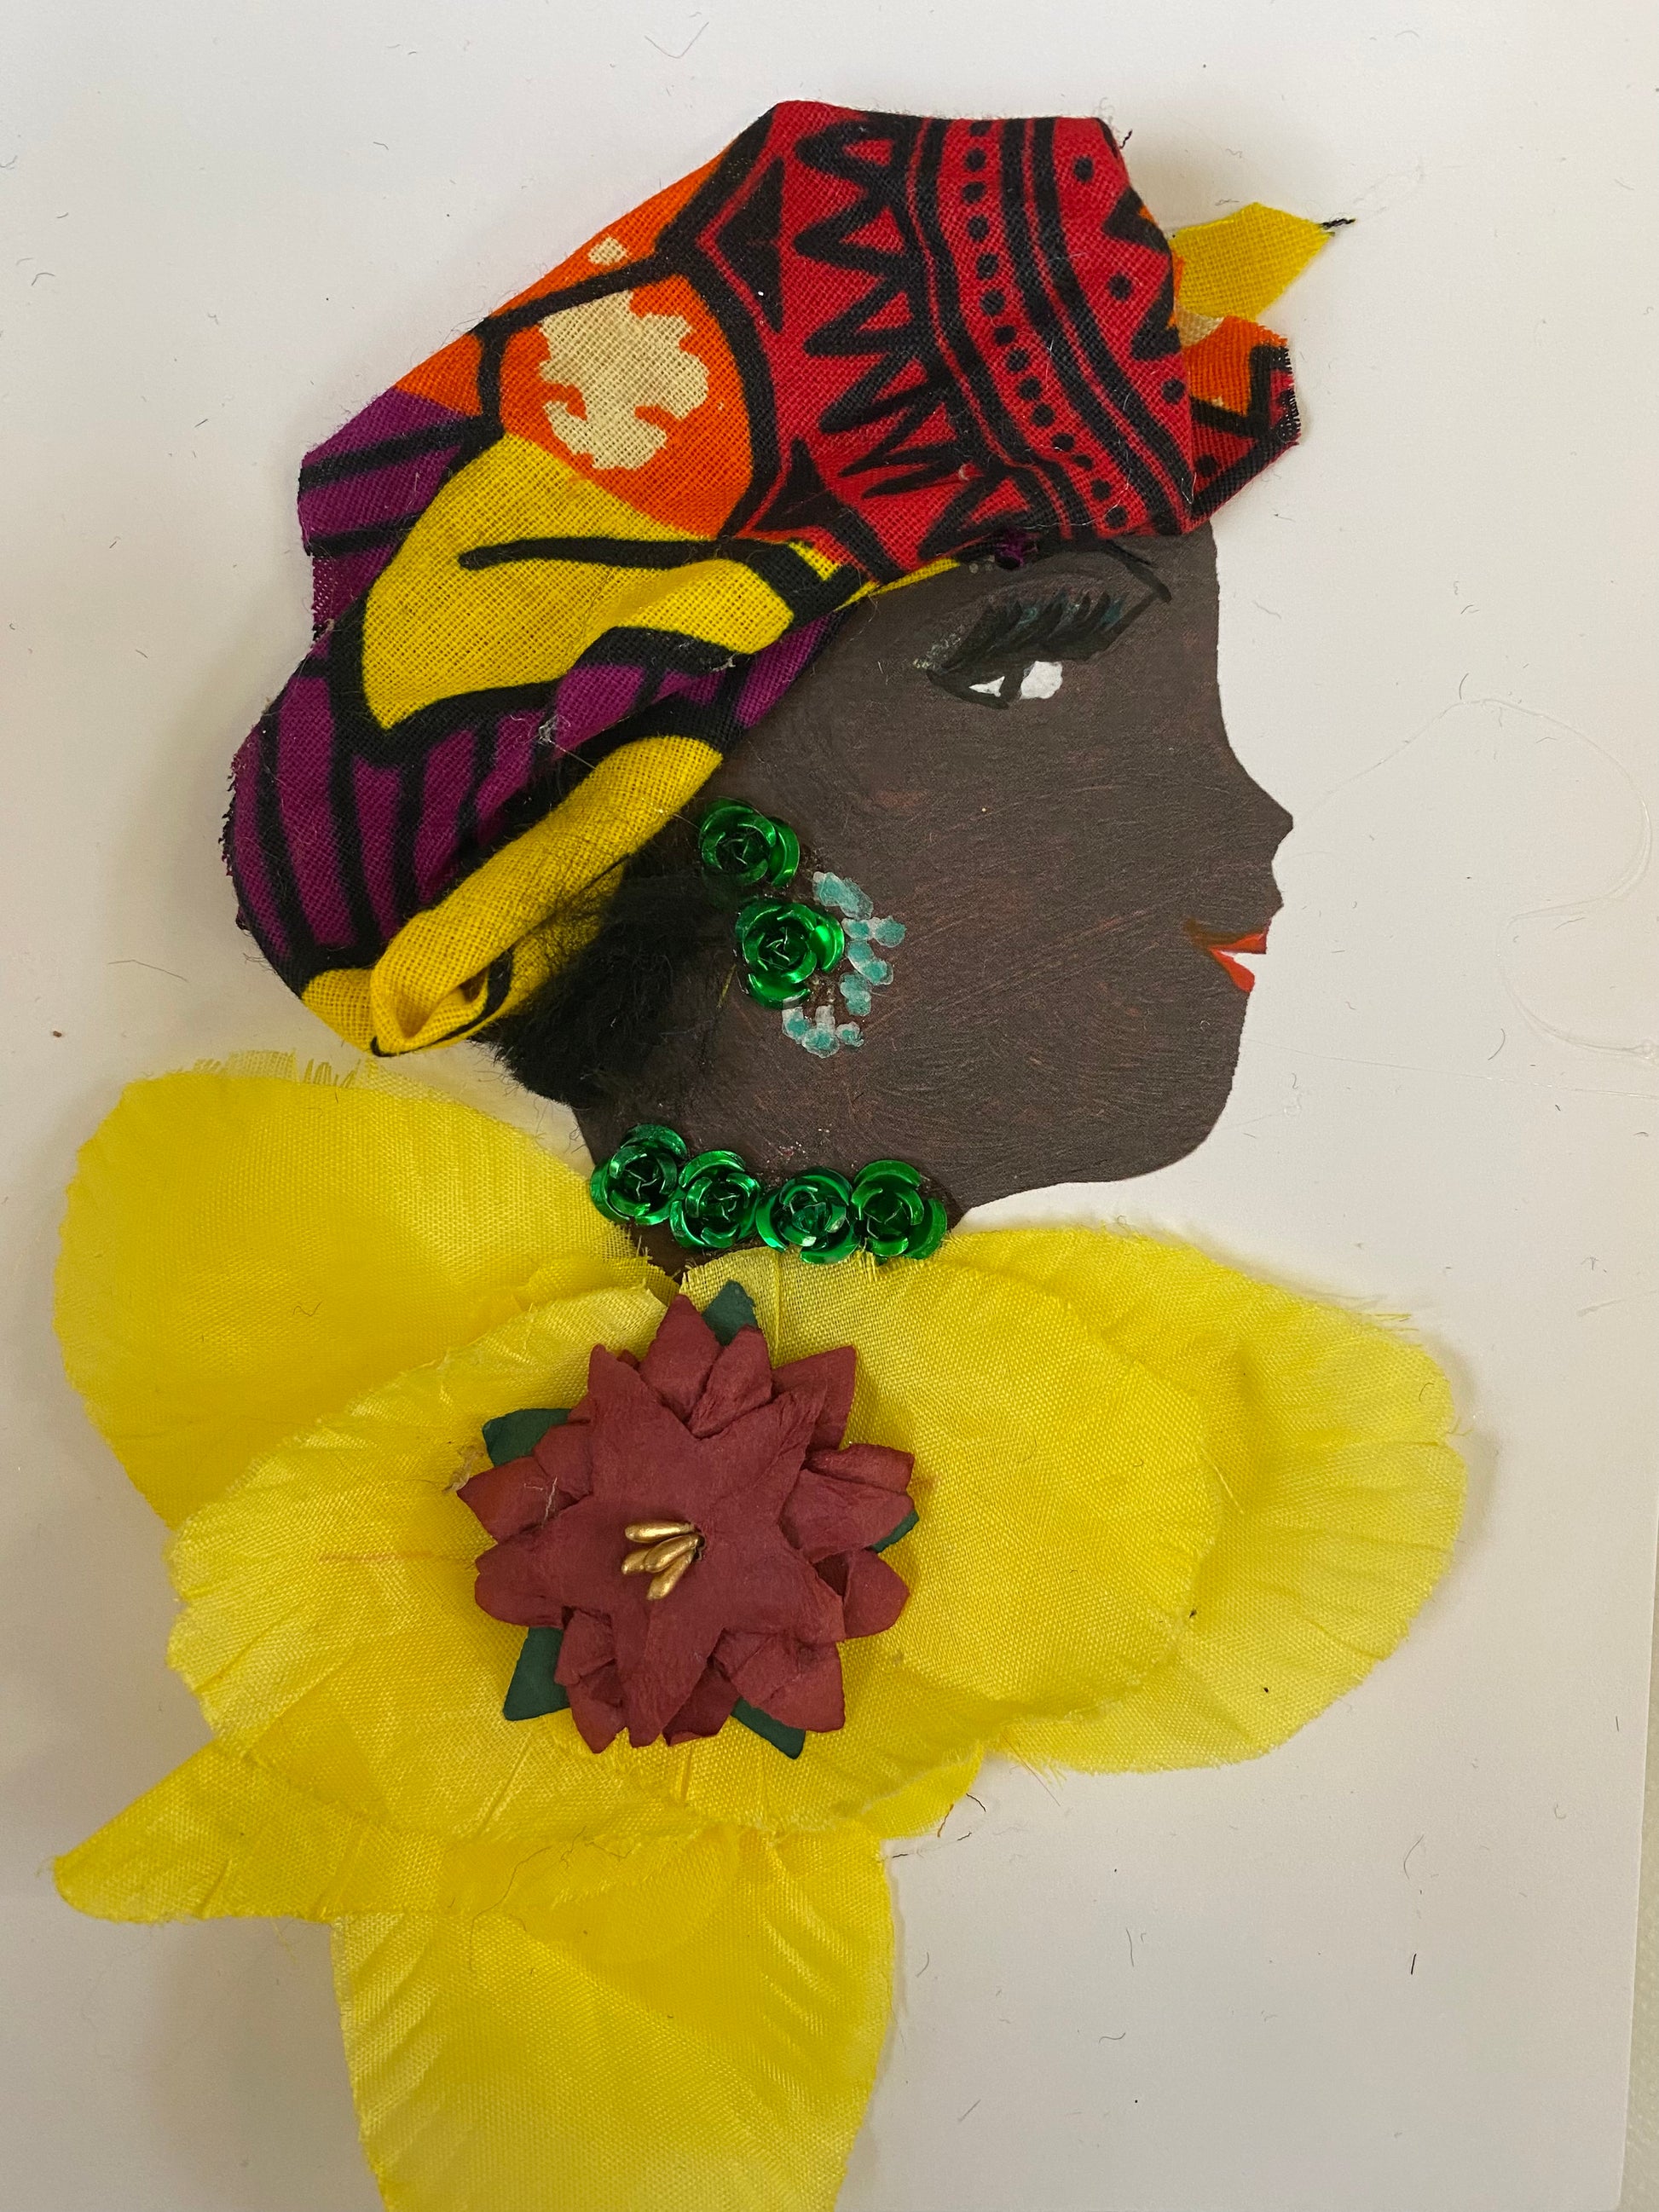 This handmade card called Dr. Yasmin Yellow. She has a black skin tone and is an artistic card featuring a vibrant woman in an eye-catching headwrap, a bright yellow blouse, and emerald green jewellery. 